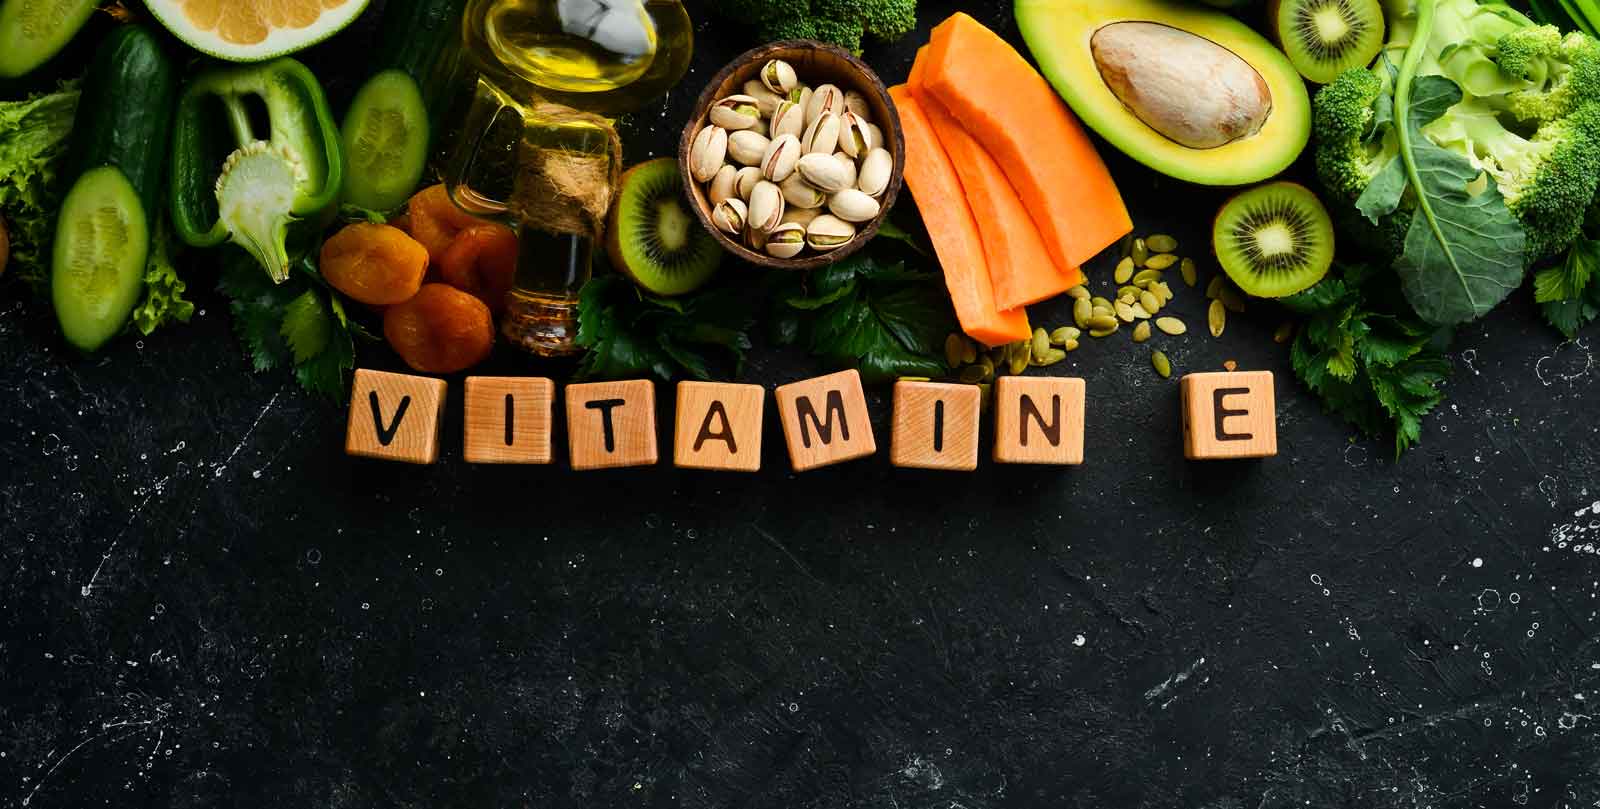 Vitamin E | What Is It and Why Does It Matter